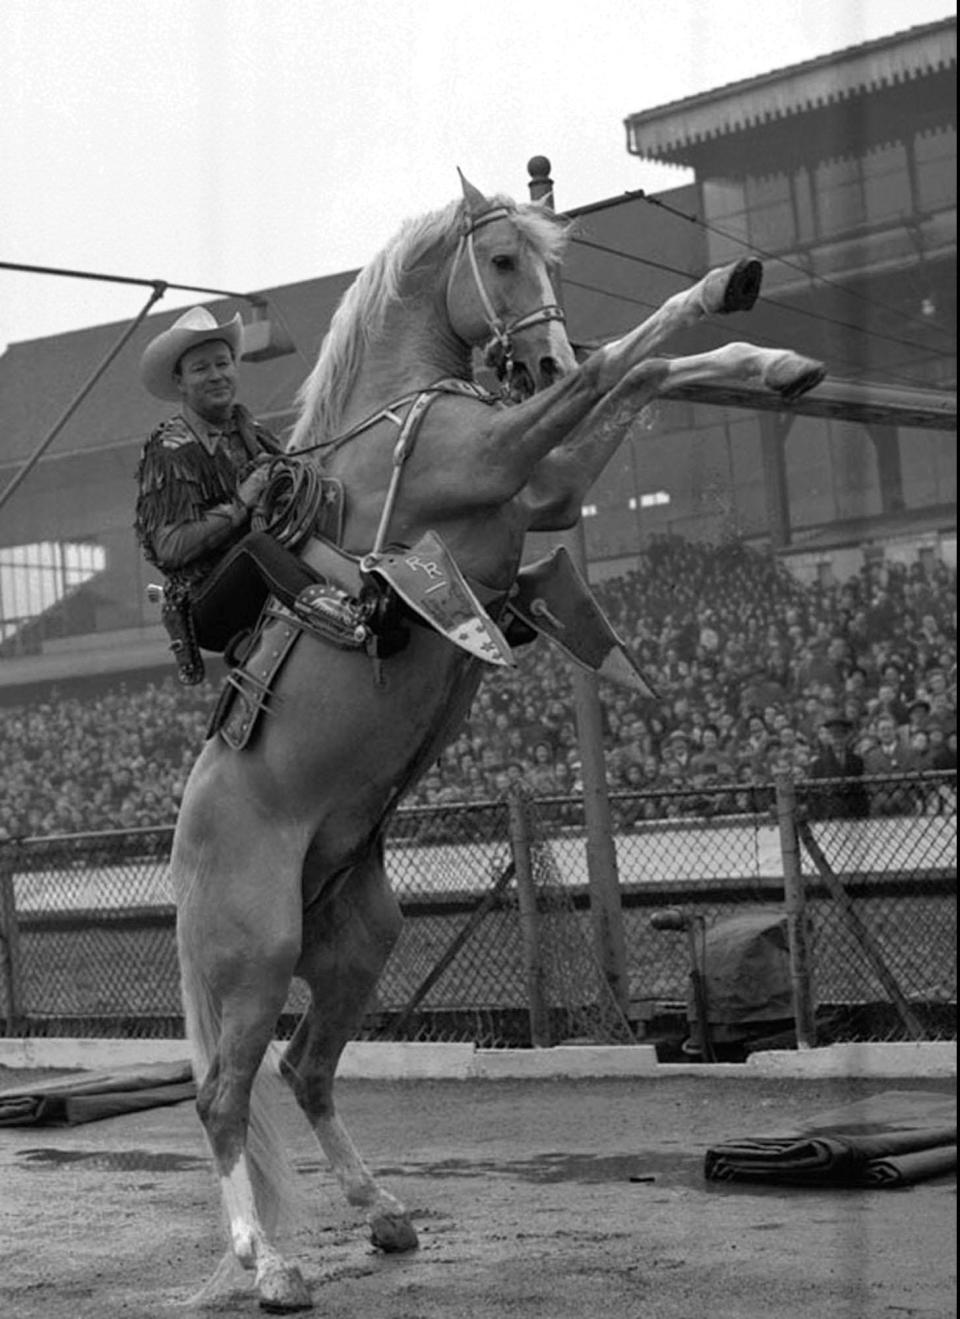 Roy Rogers rides his famous horse Trigger in this 1954 file photo taken in London. Rogers, the singing “King of the Cowboys” whose straight-shooting exploits in movies and television made him a hero to generations of young fans and No. 1 at the box office, died July 6, 1998. He was 86.